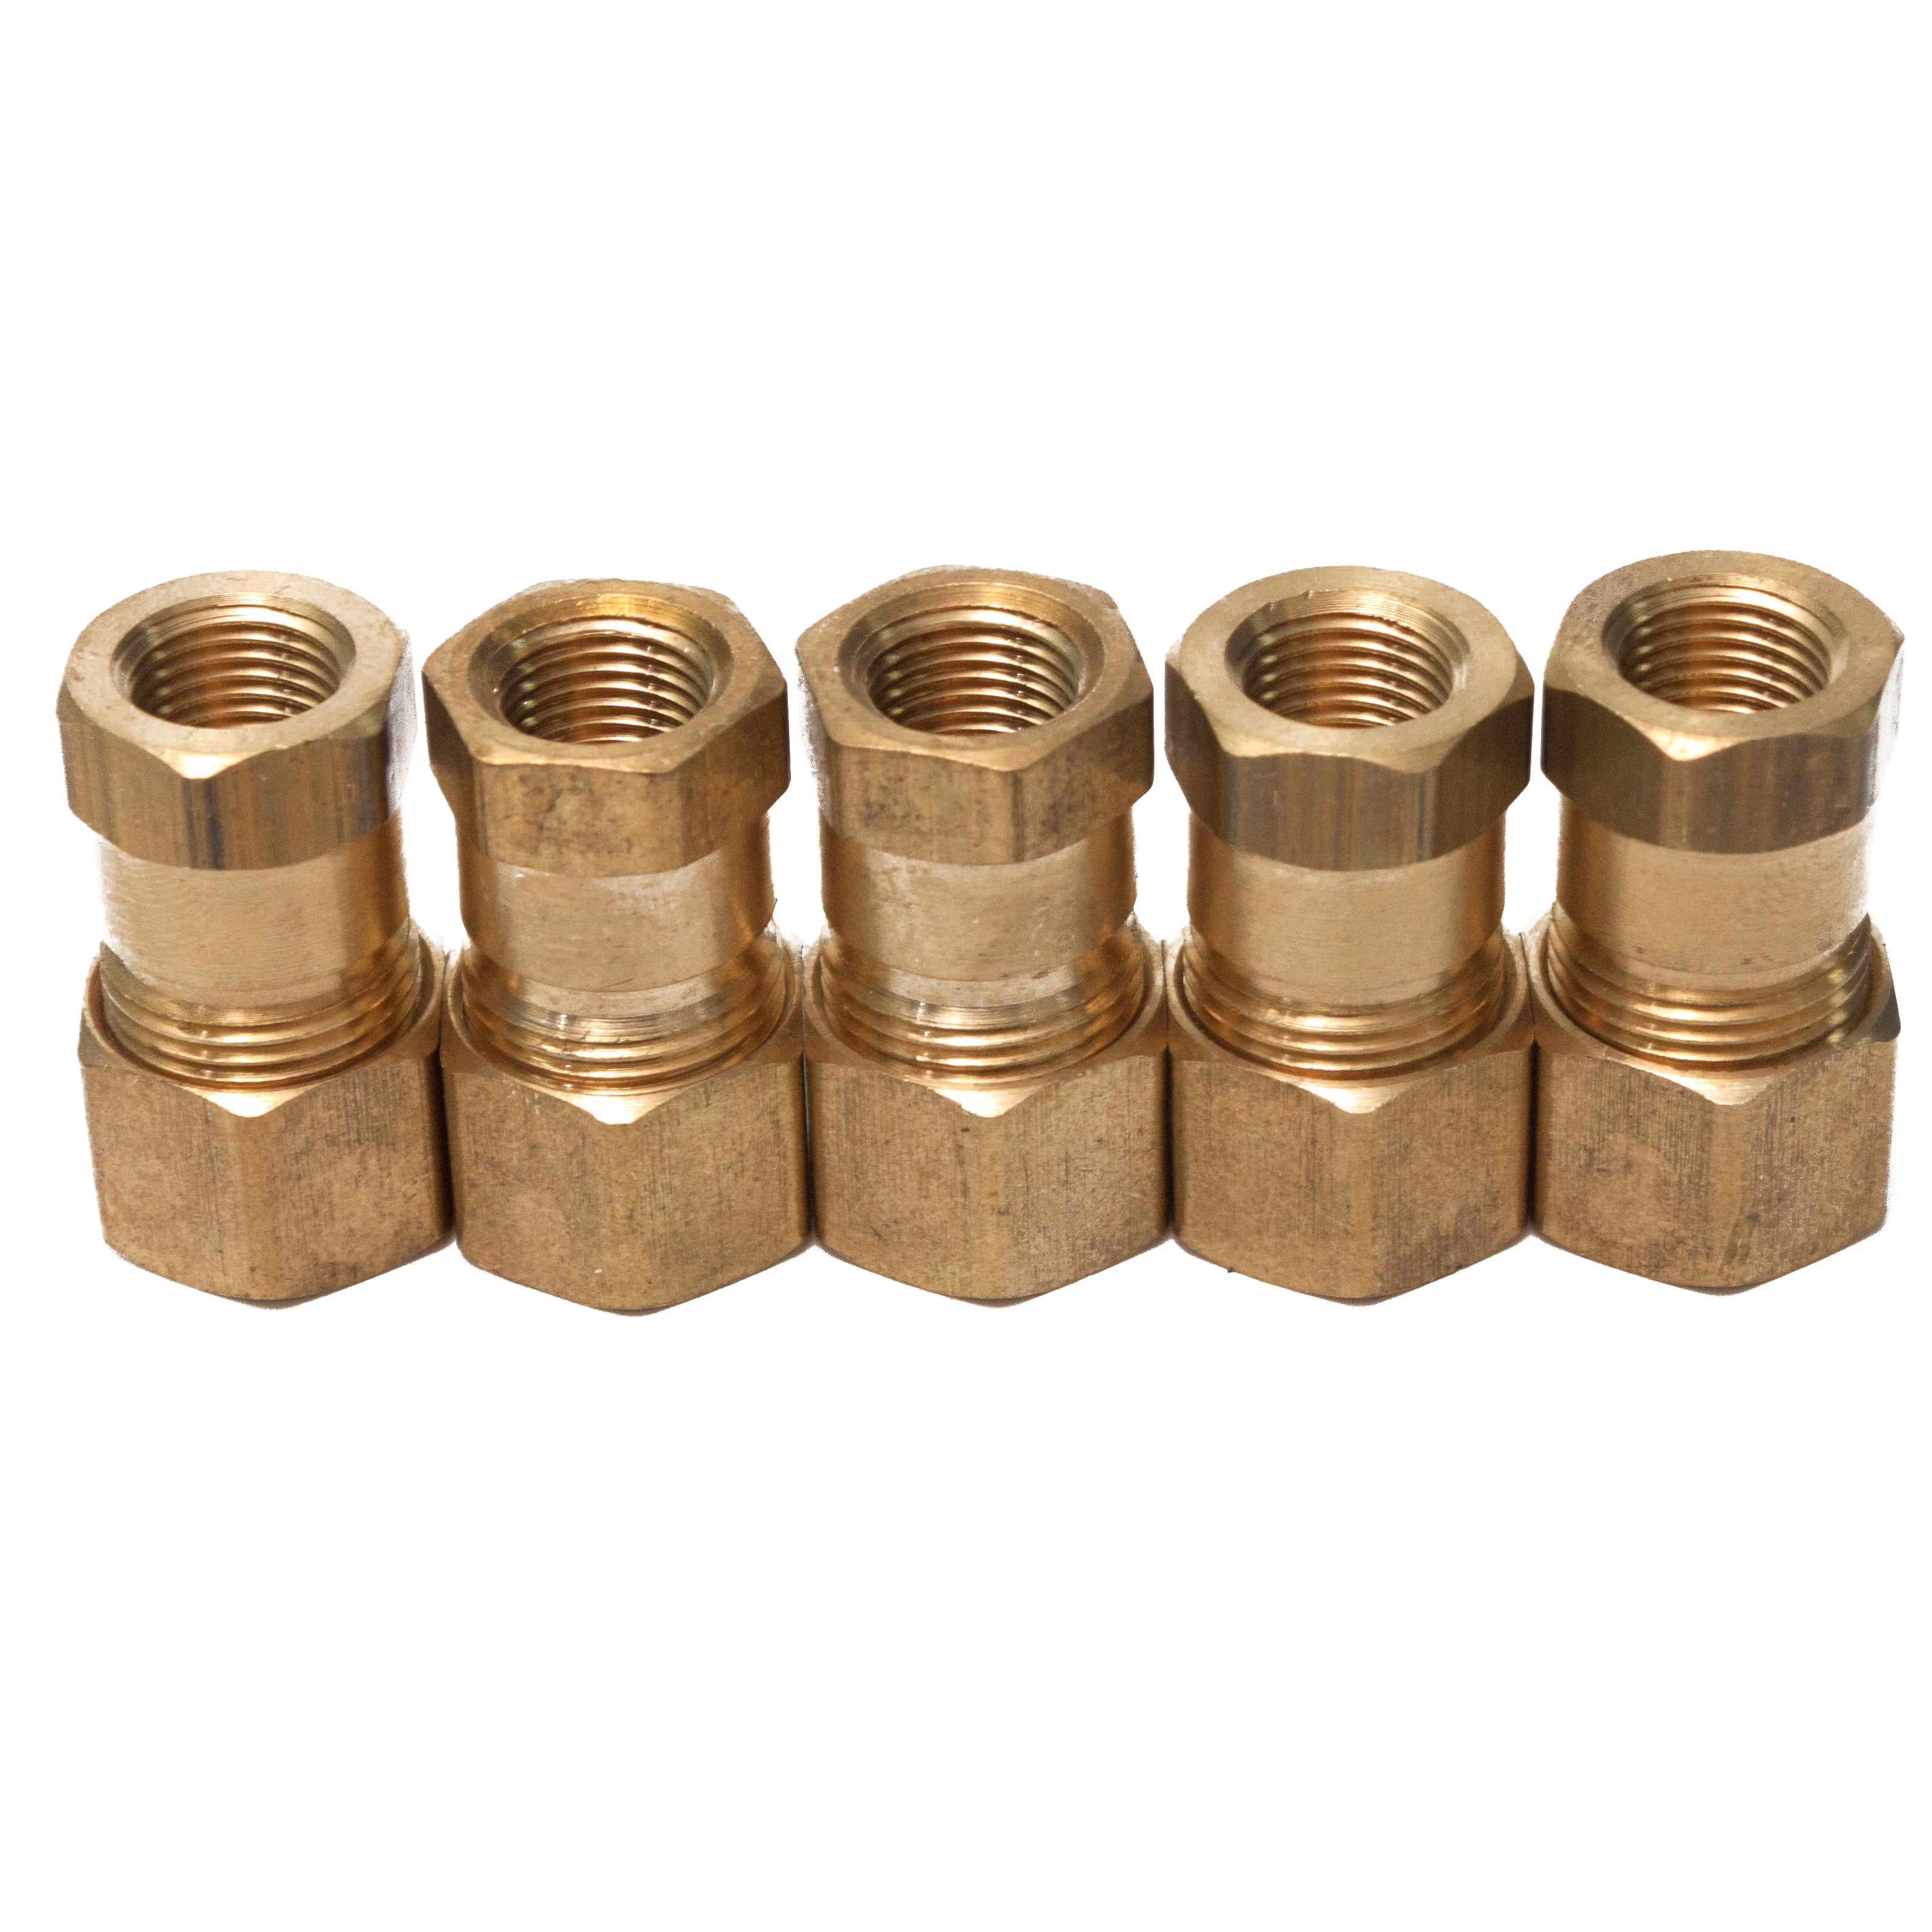 LTWFITTING Brass 3/8-Inch OD x 1/8-Inch Female NPT Compression Connector Fitting(Pack of 5)